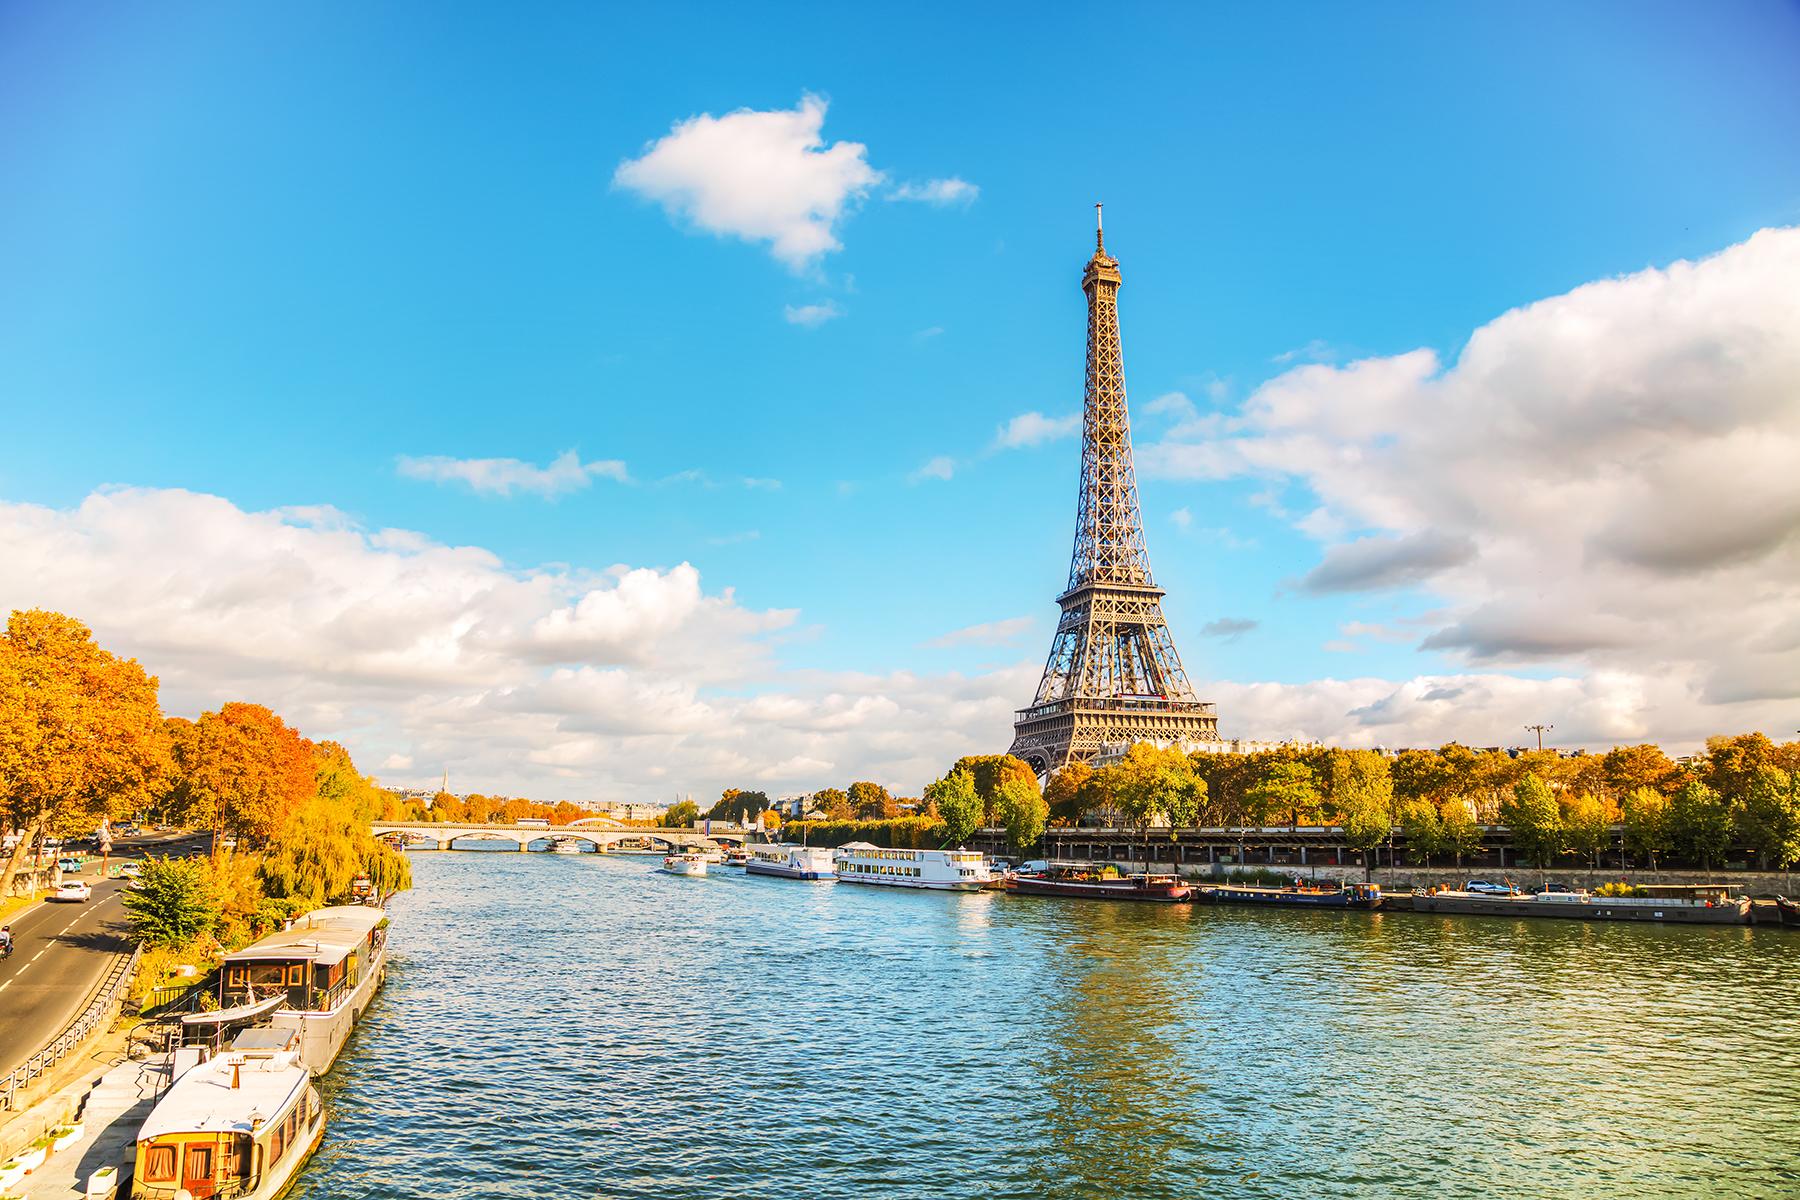 What You Need To Know About Visiting The Eiffel Tower